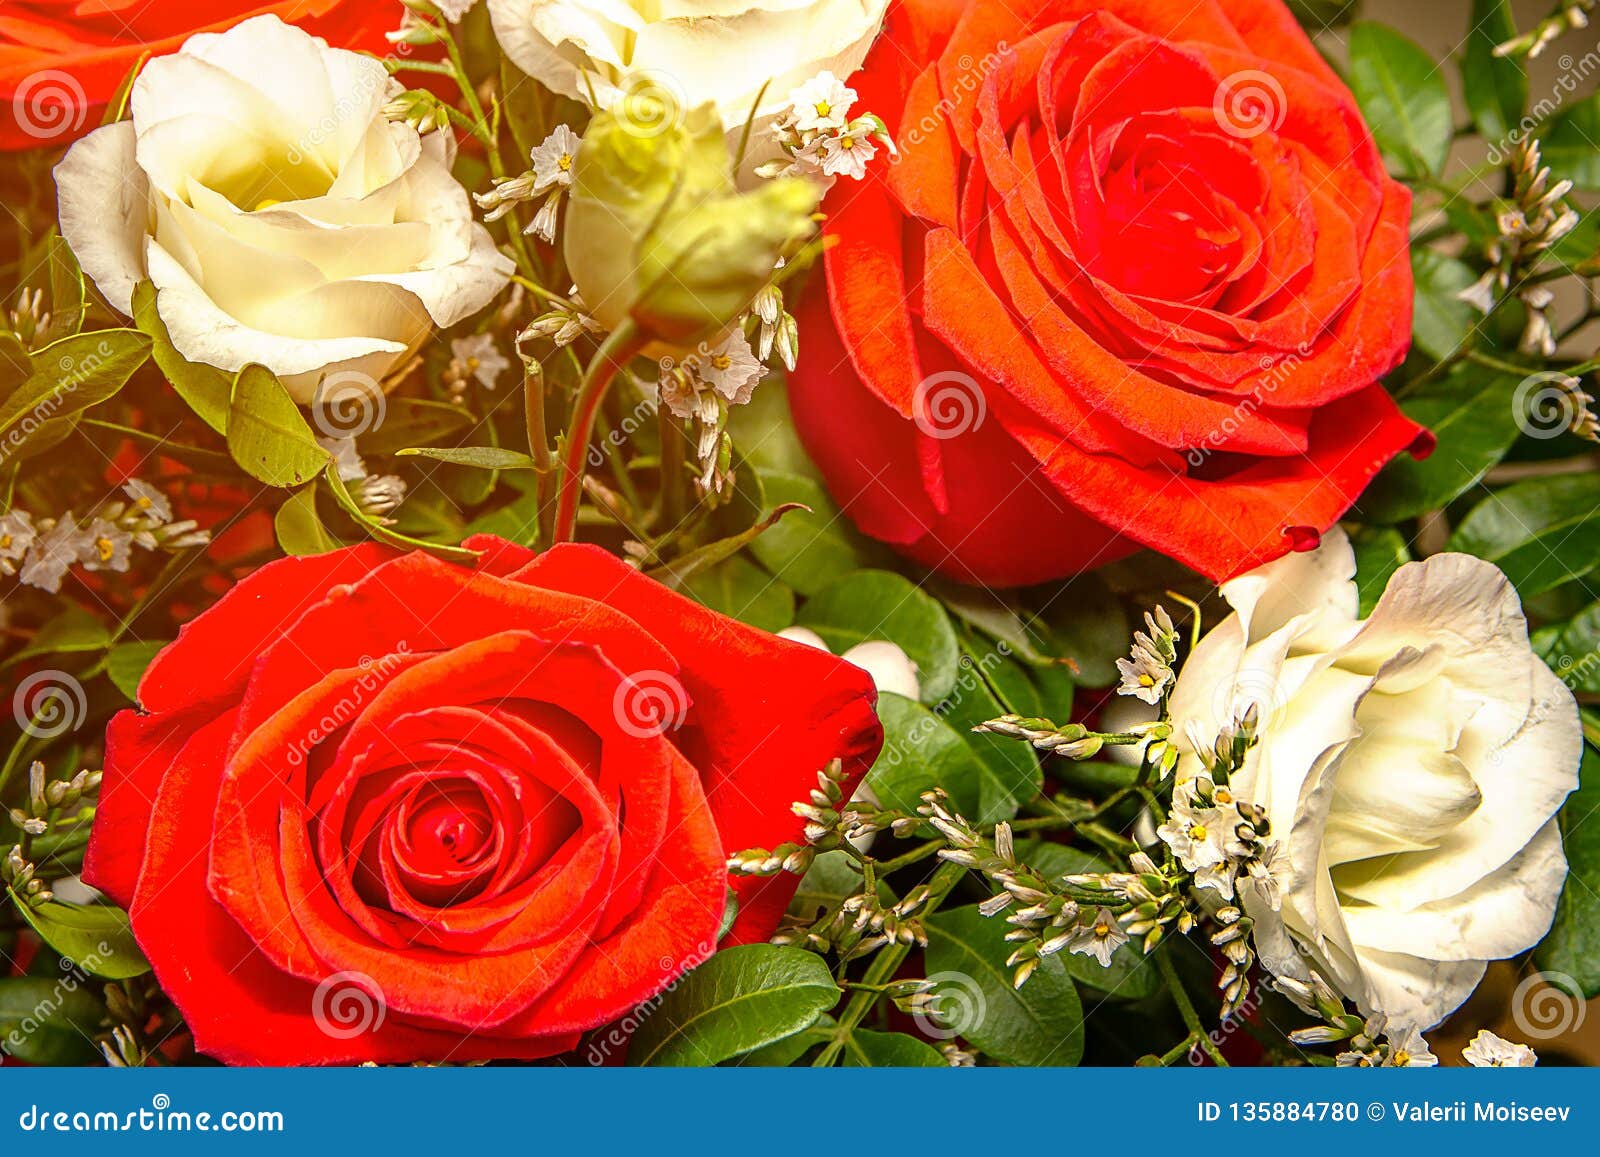 Close Up Red and White Roses with Green Grass Texture Stock Photo ...